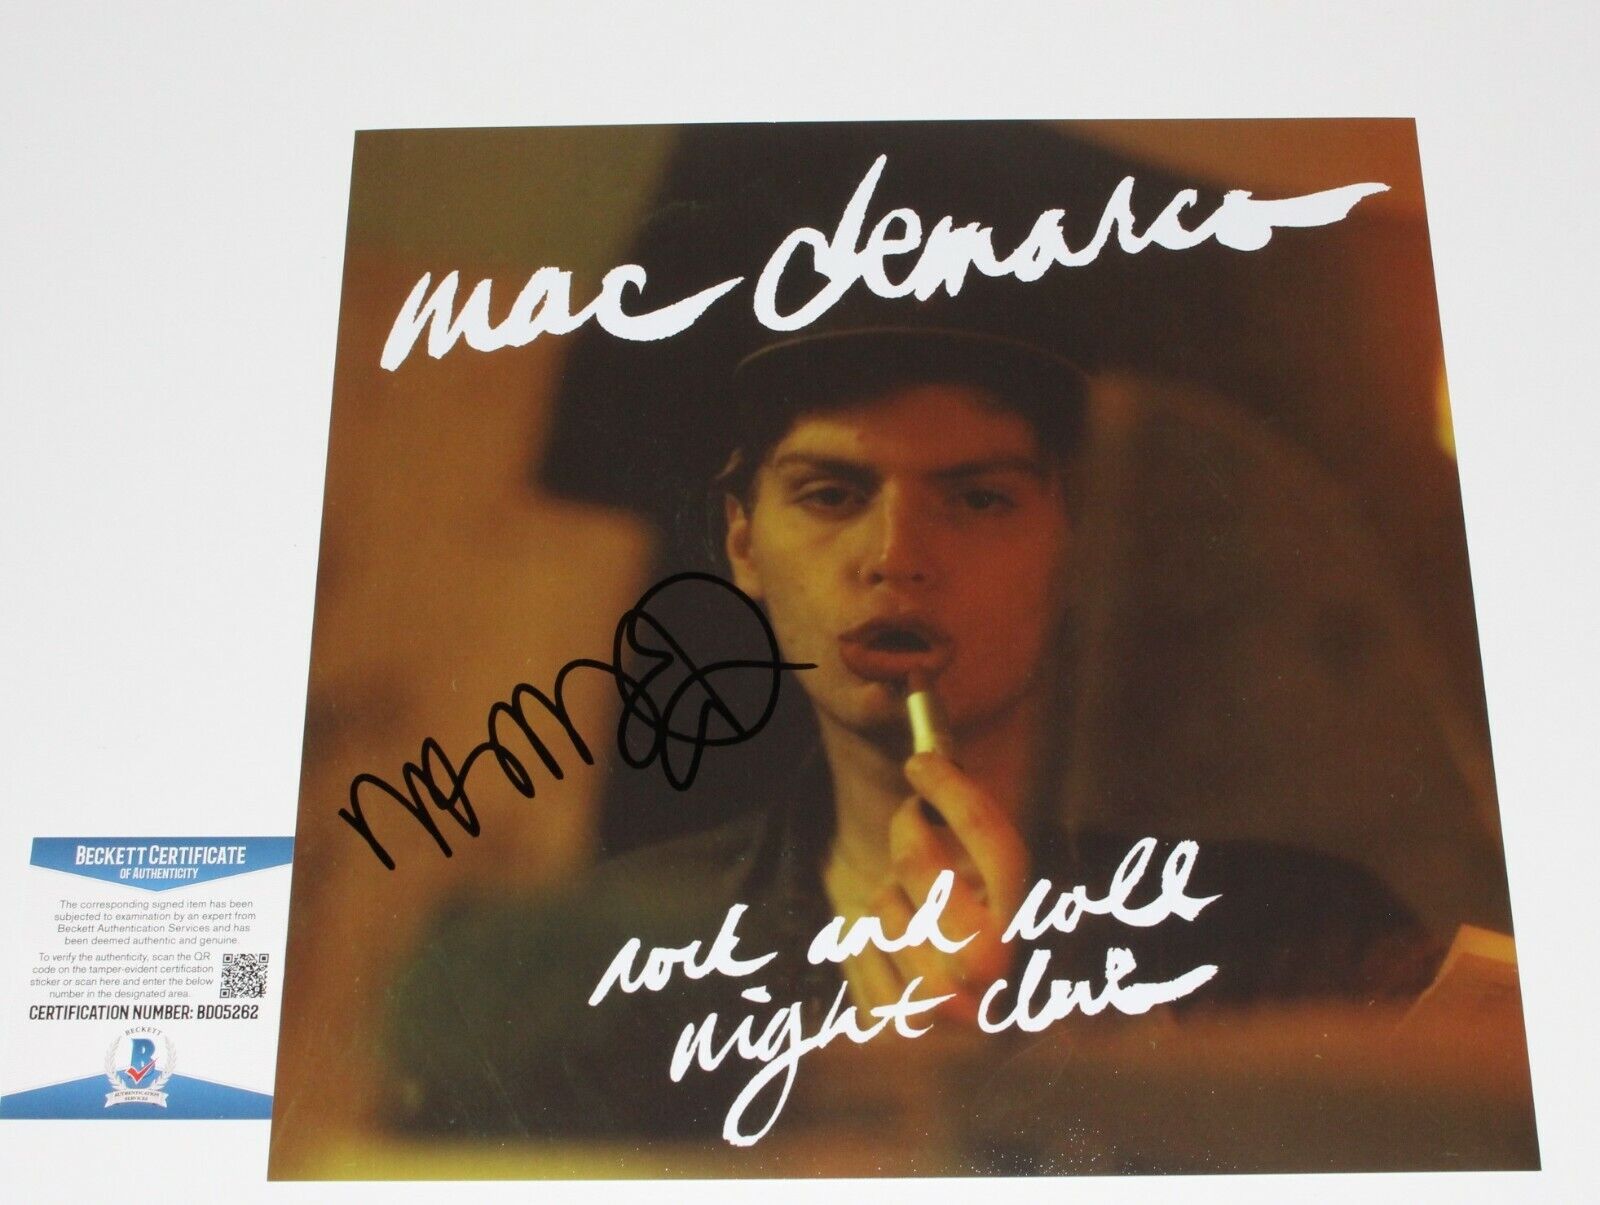 MAC DEMARCO SIGNED ROCK AND ROLL NIGHT CLUB ALBUM FLAT 12x12 Photo Poster painting BECKETT